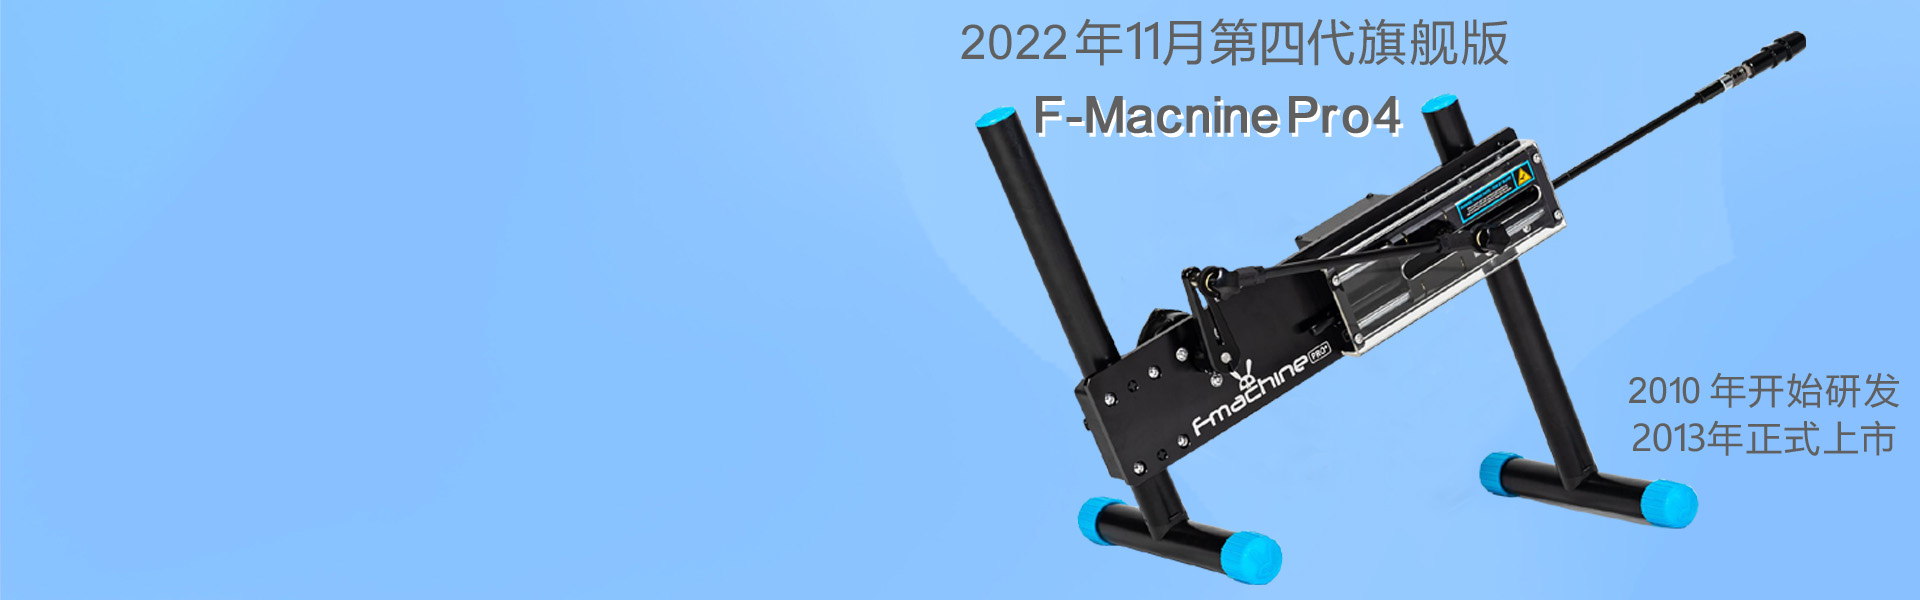 <strong>官方淘宝店F-Machine Pro4</strong>